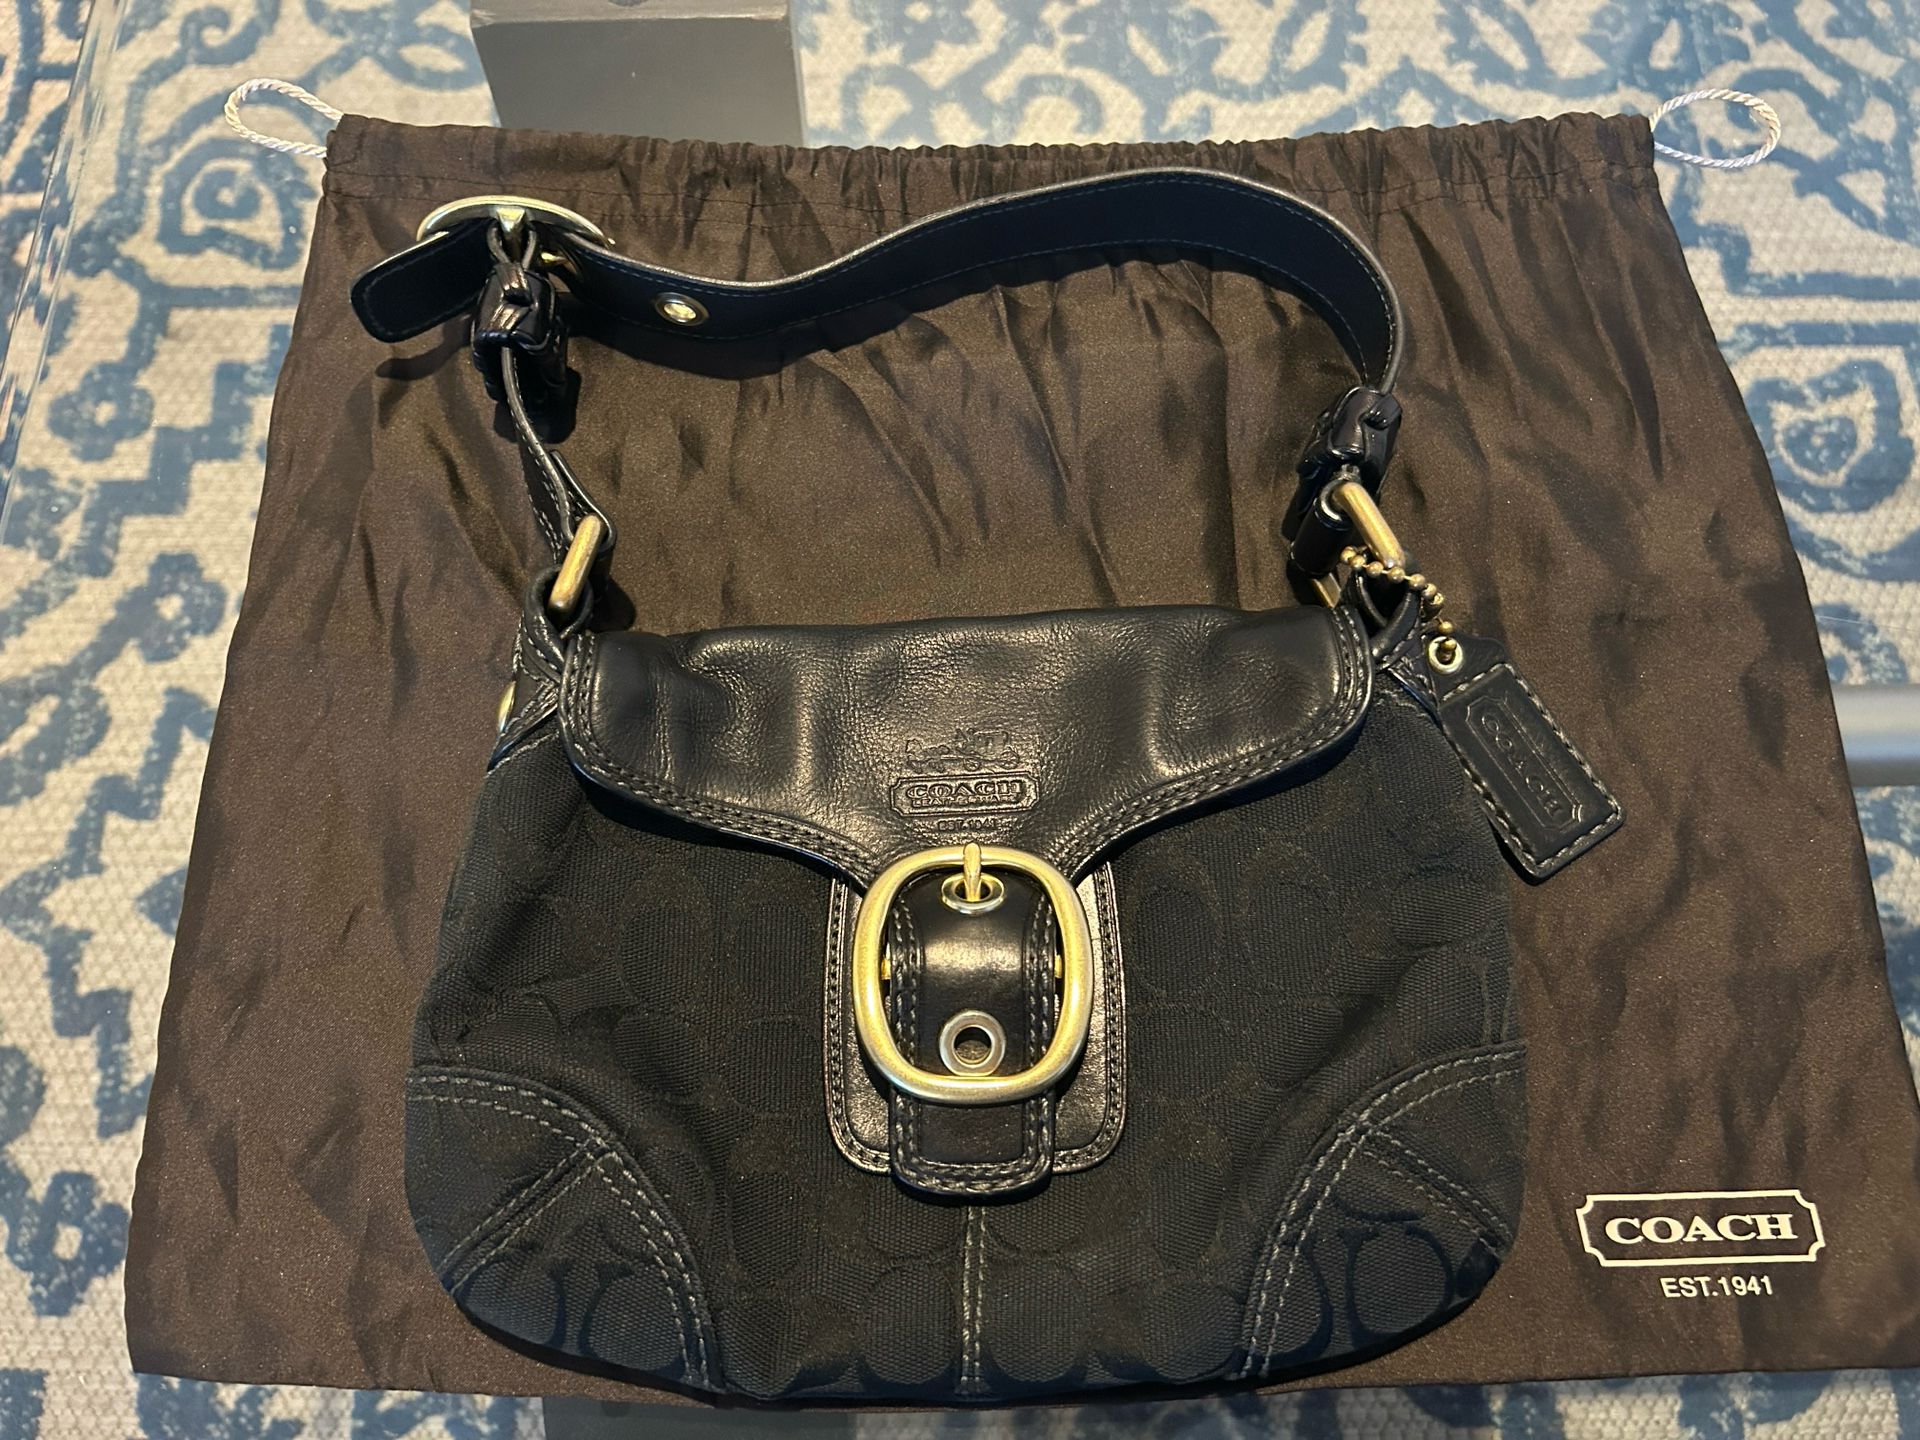 Coach Black Fabric/ Leather Shoulder Bag GO(contact info removed)1